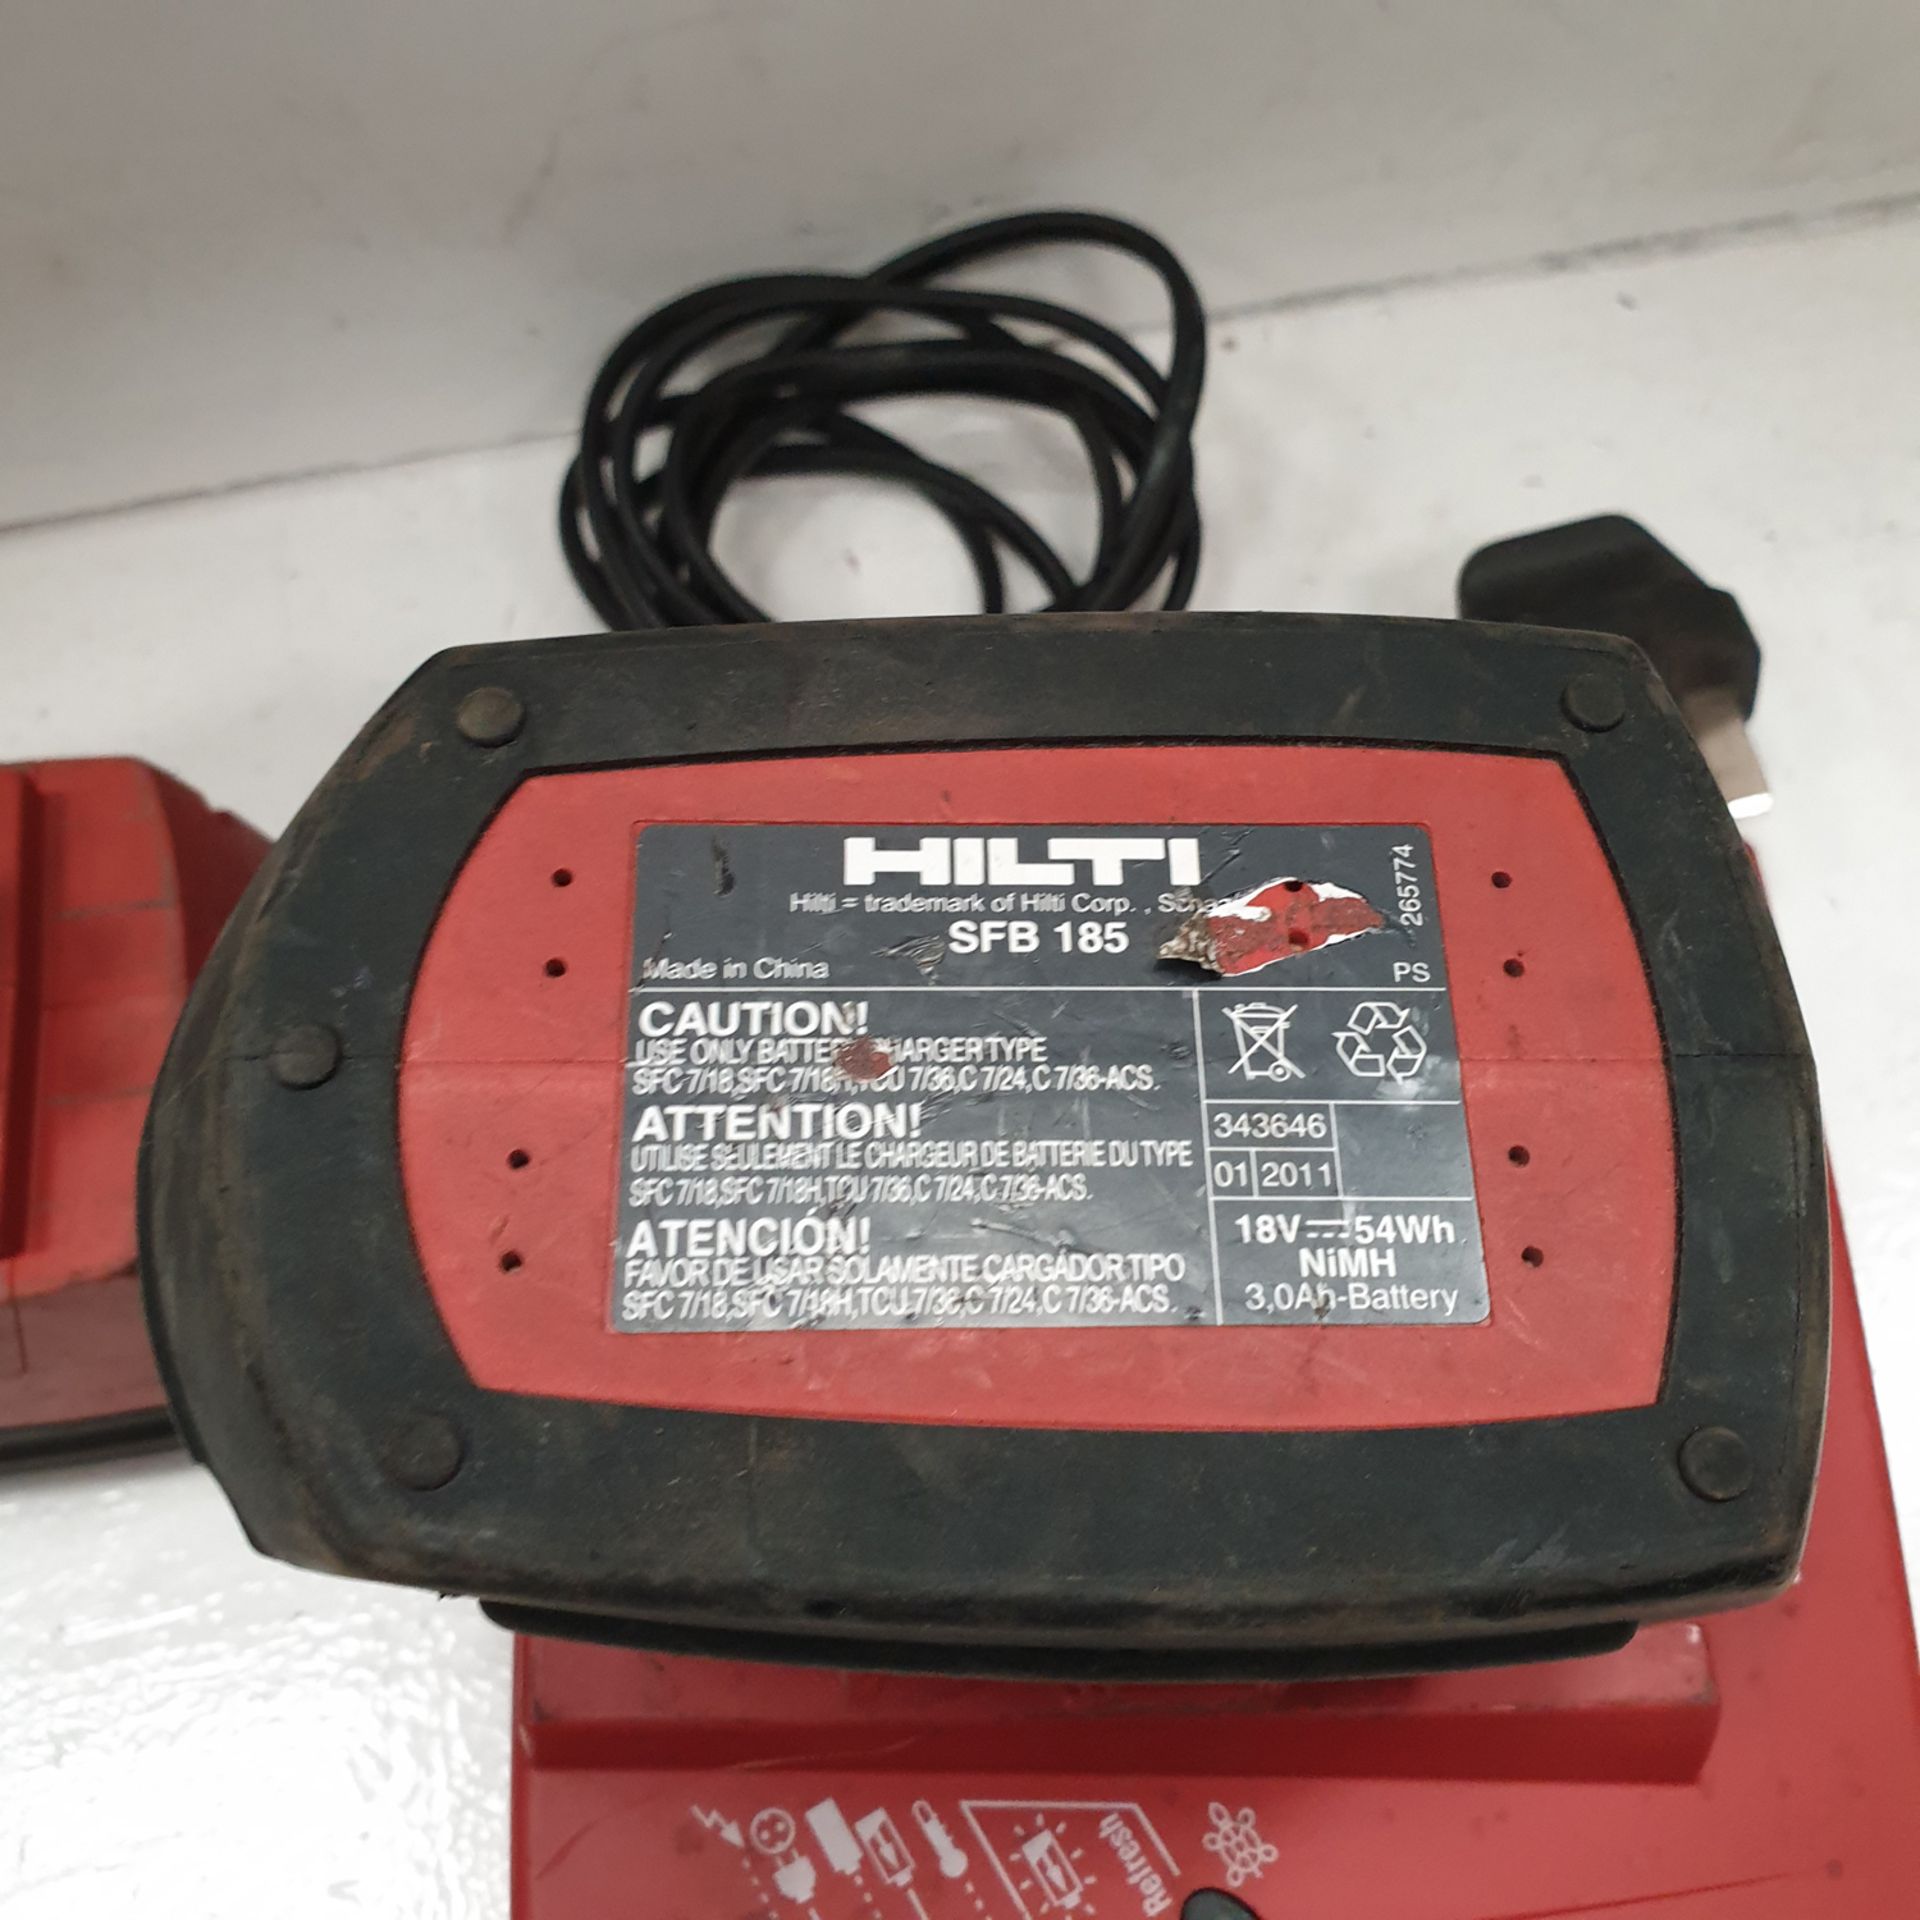 HILTI C7/24 Battery Charger. With 2 Batteries. - Image 2 of 3